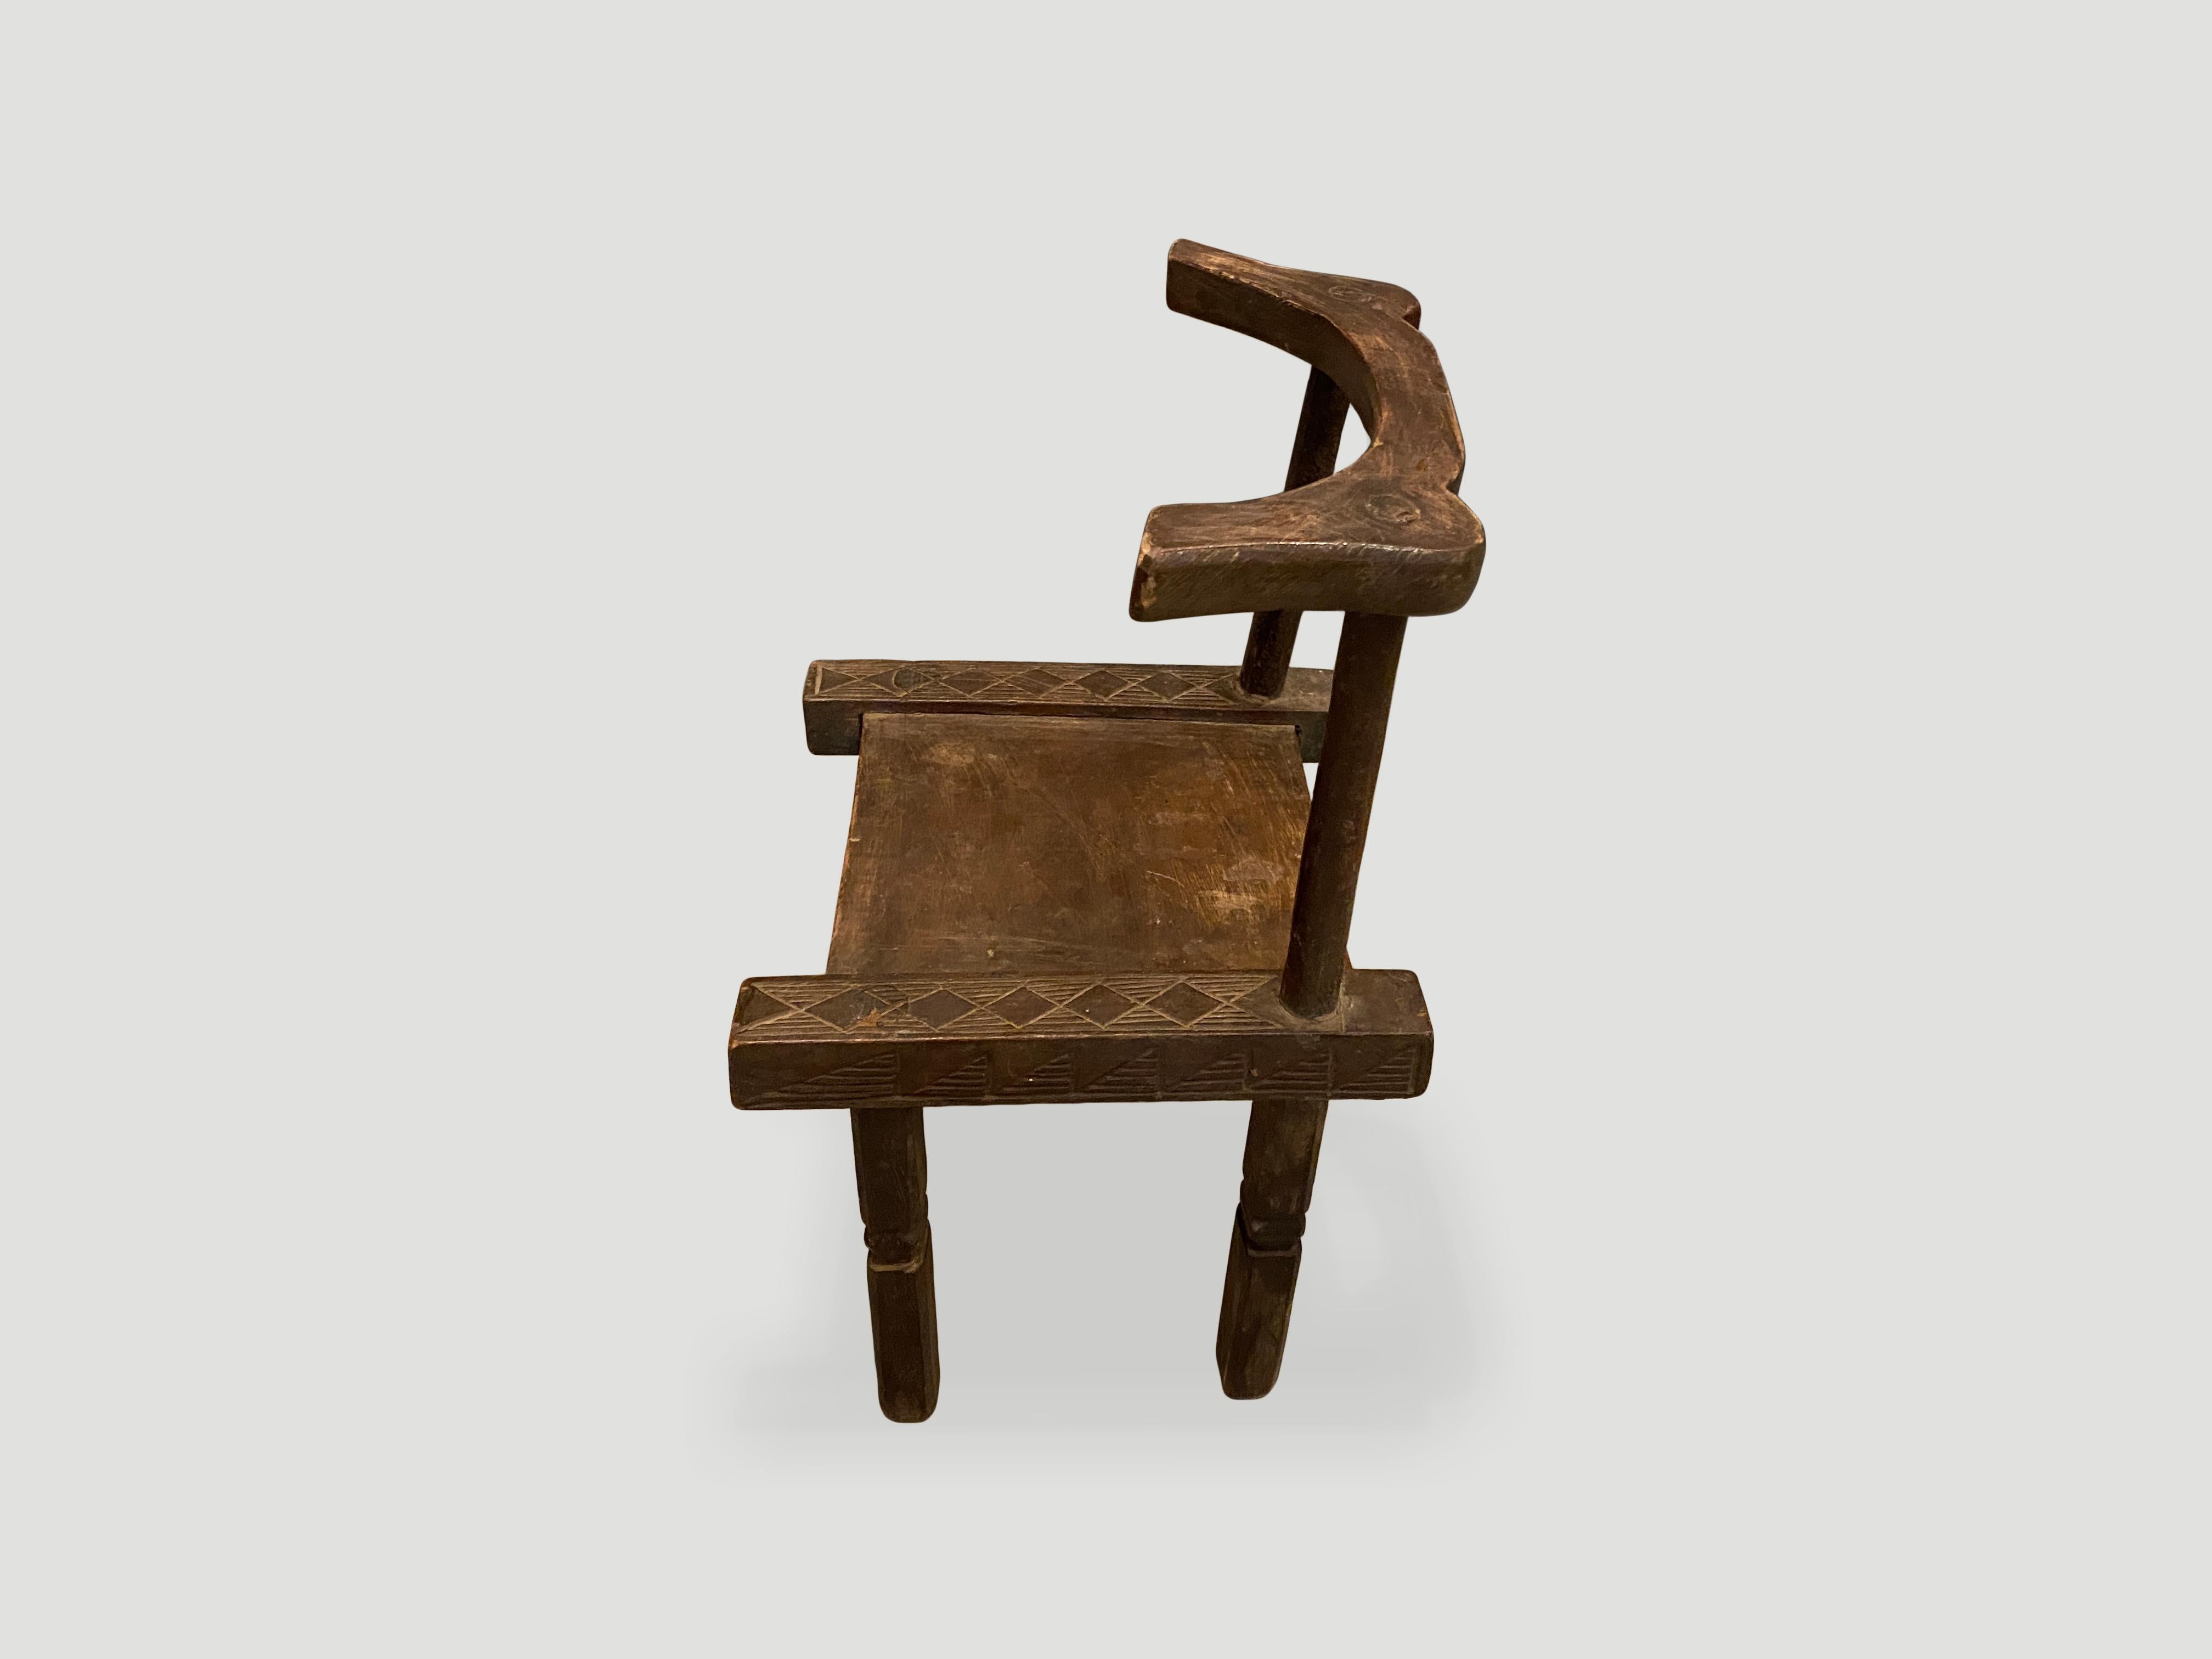 Hand carved wooden chair from the Ivory Coast of Africa. This can also be used as a low side table. A piece of art. 

This chair was sourced in the spirit of wabi-sabi, a Japanese philosophy that beauty can be found in imperfection and